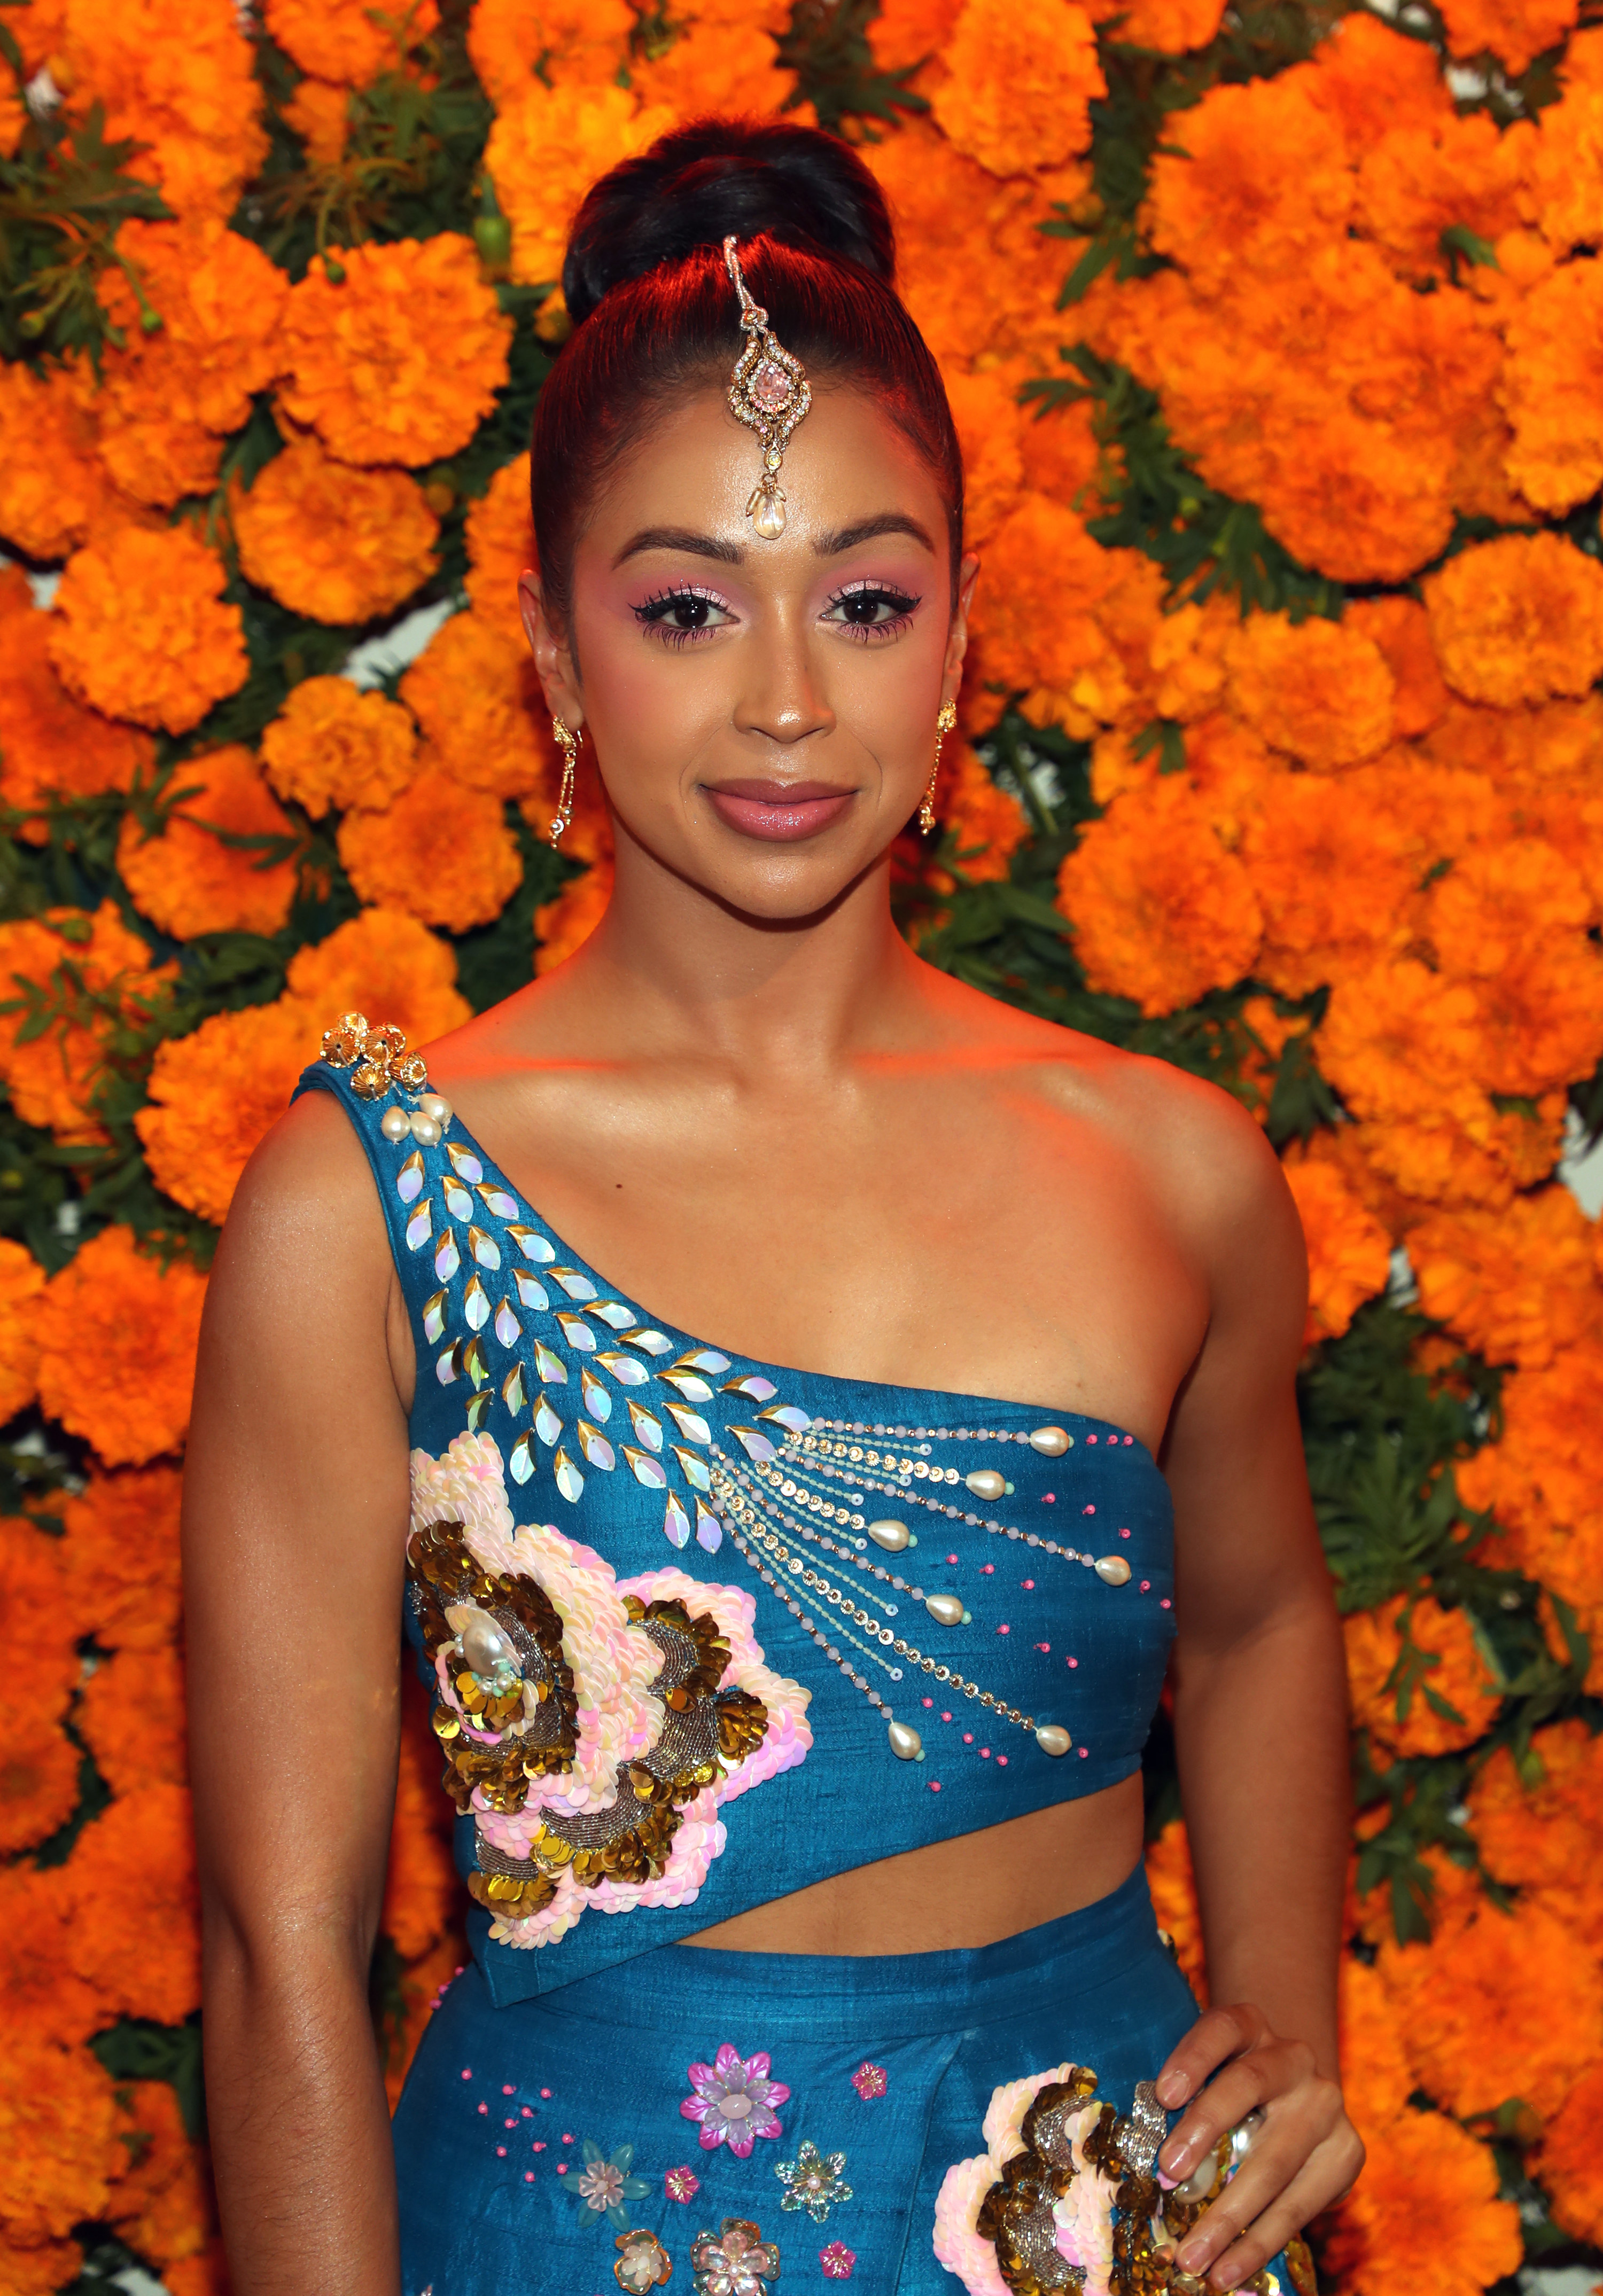 Liza Koshy poses at the Phenomenal x Live Tinted Diwali Dinner Hosted by Mindy Kaling on November 03, 2021